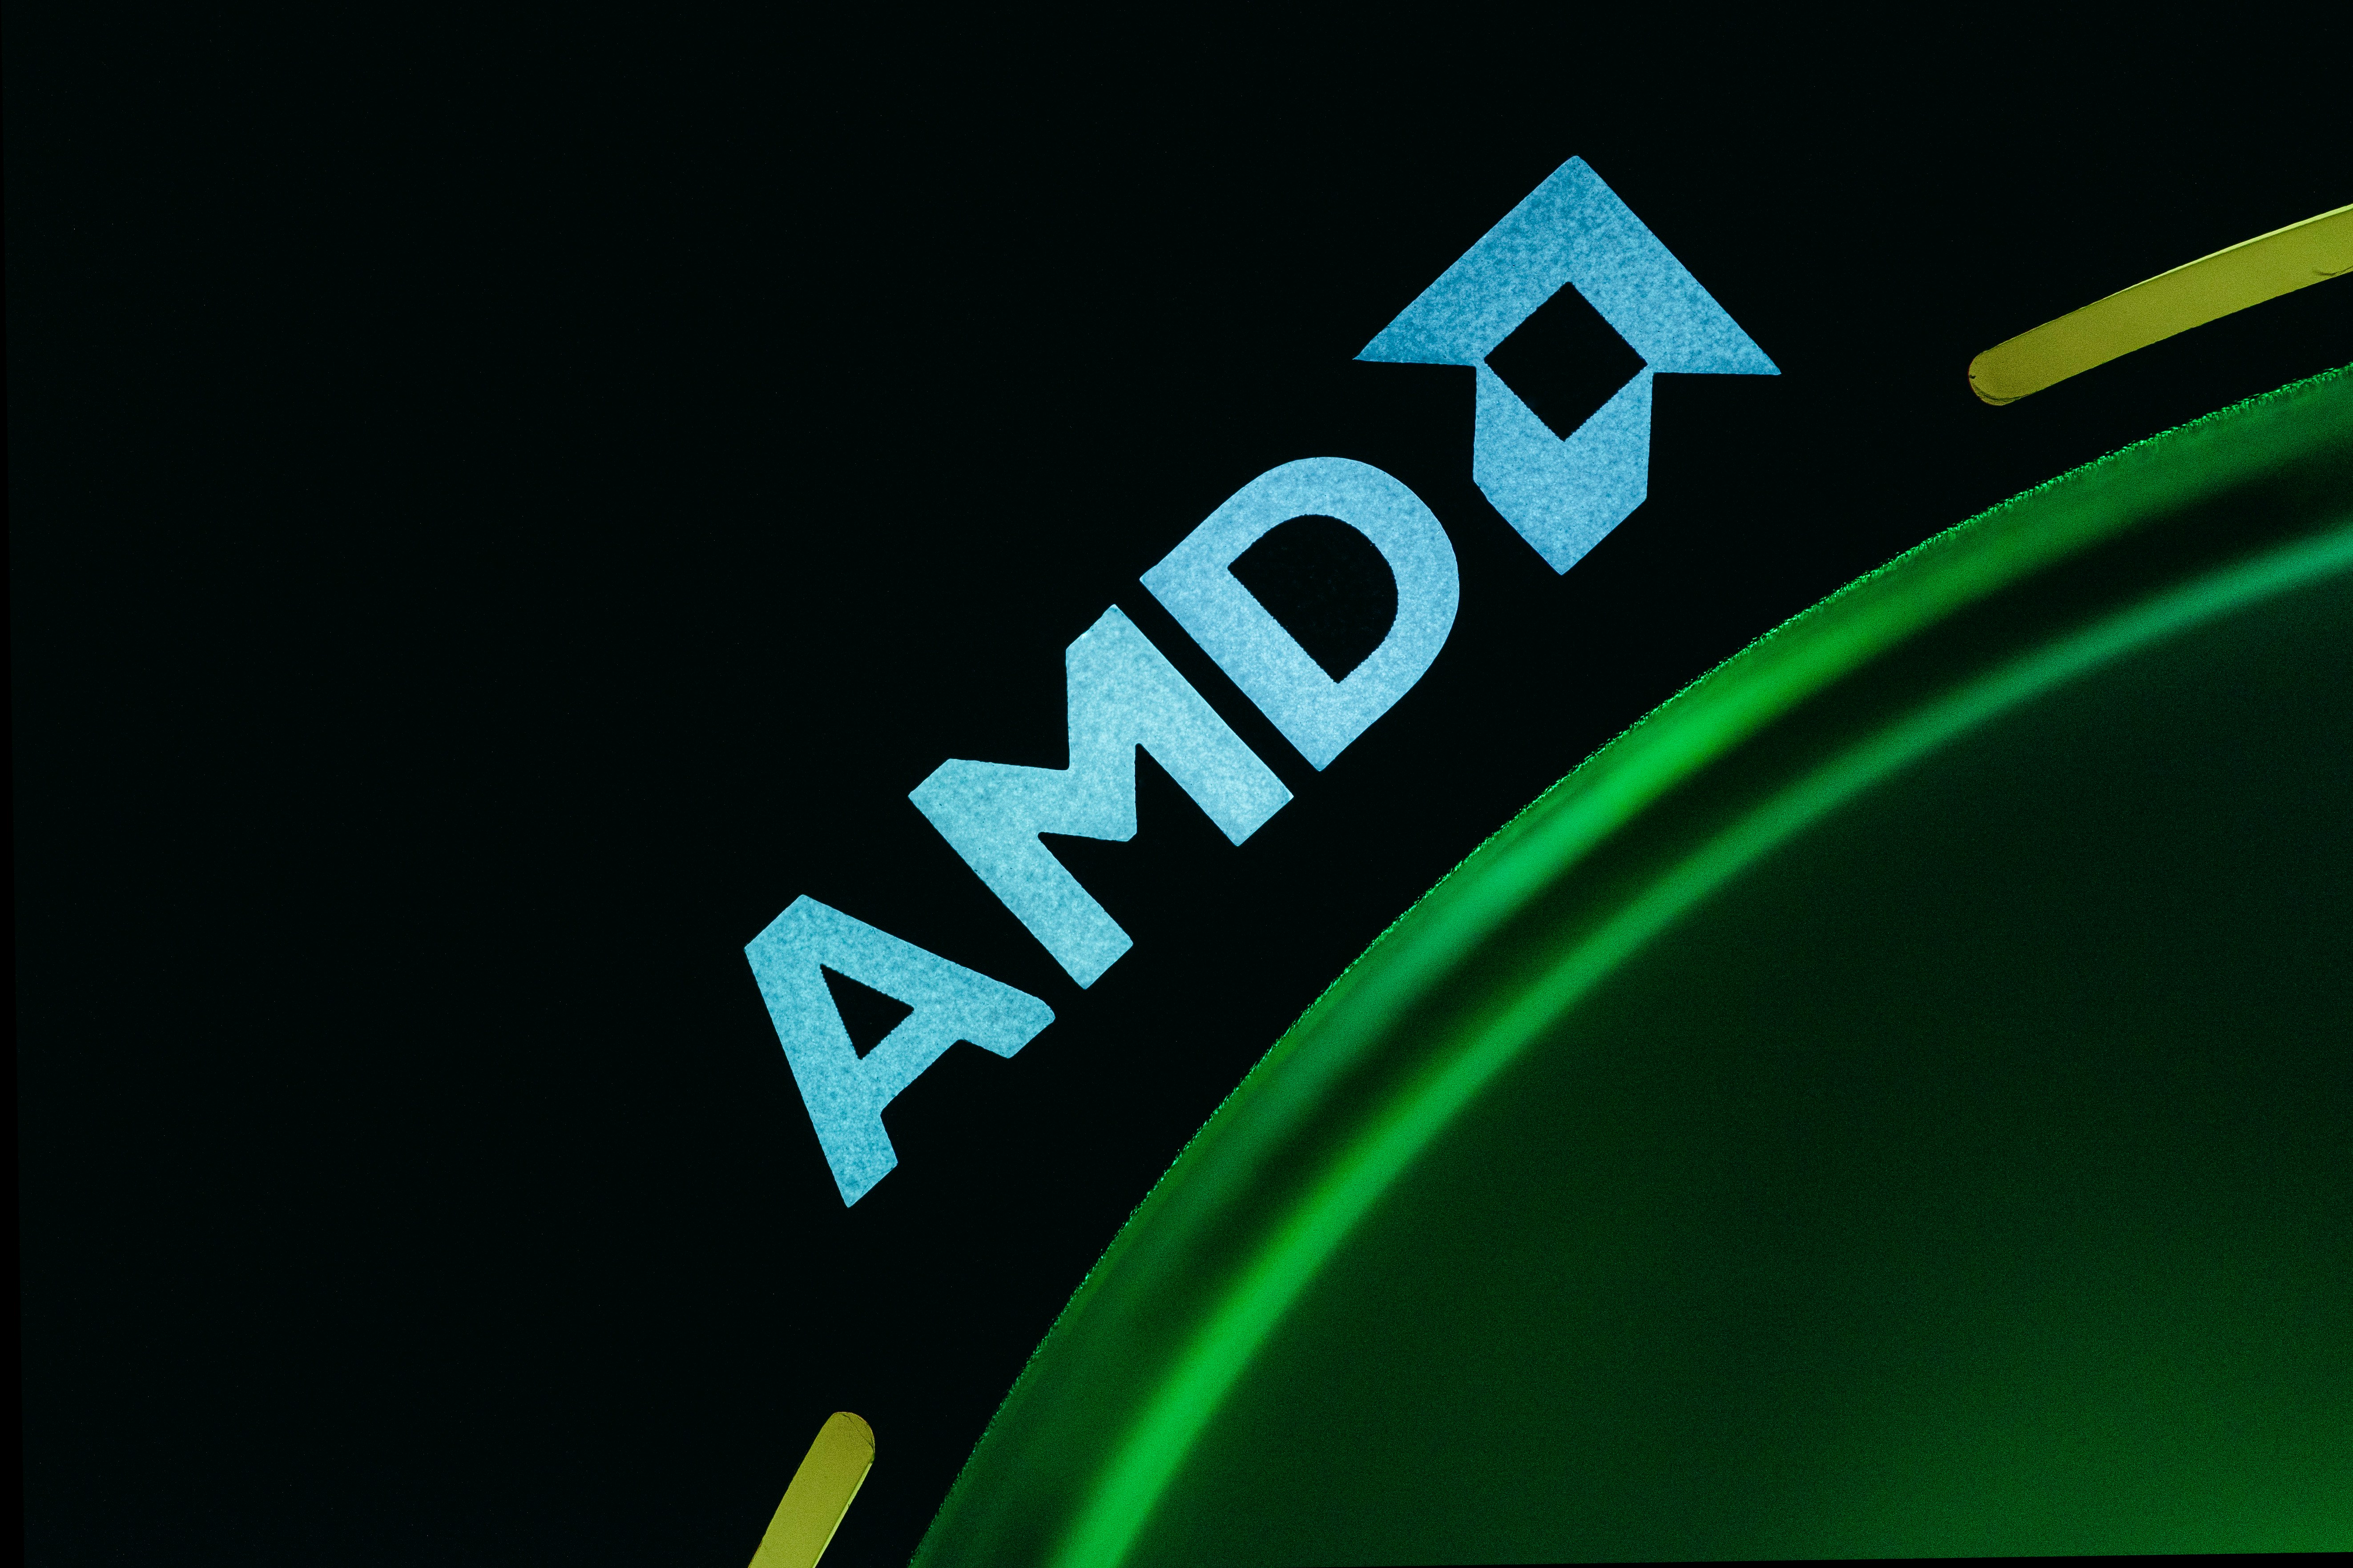 AMD is targeting the artificial intelligence PC market in a battle with NVIDIA and Intel